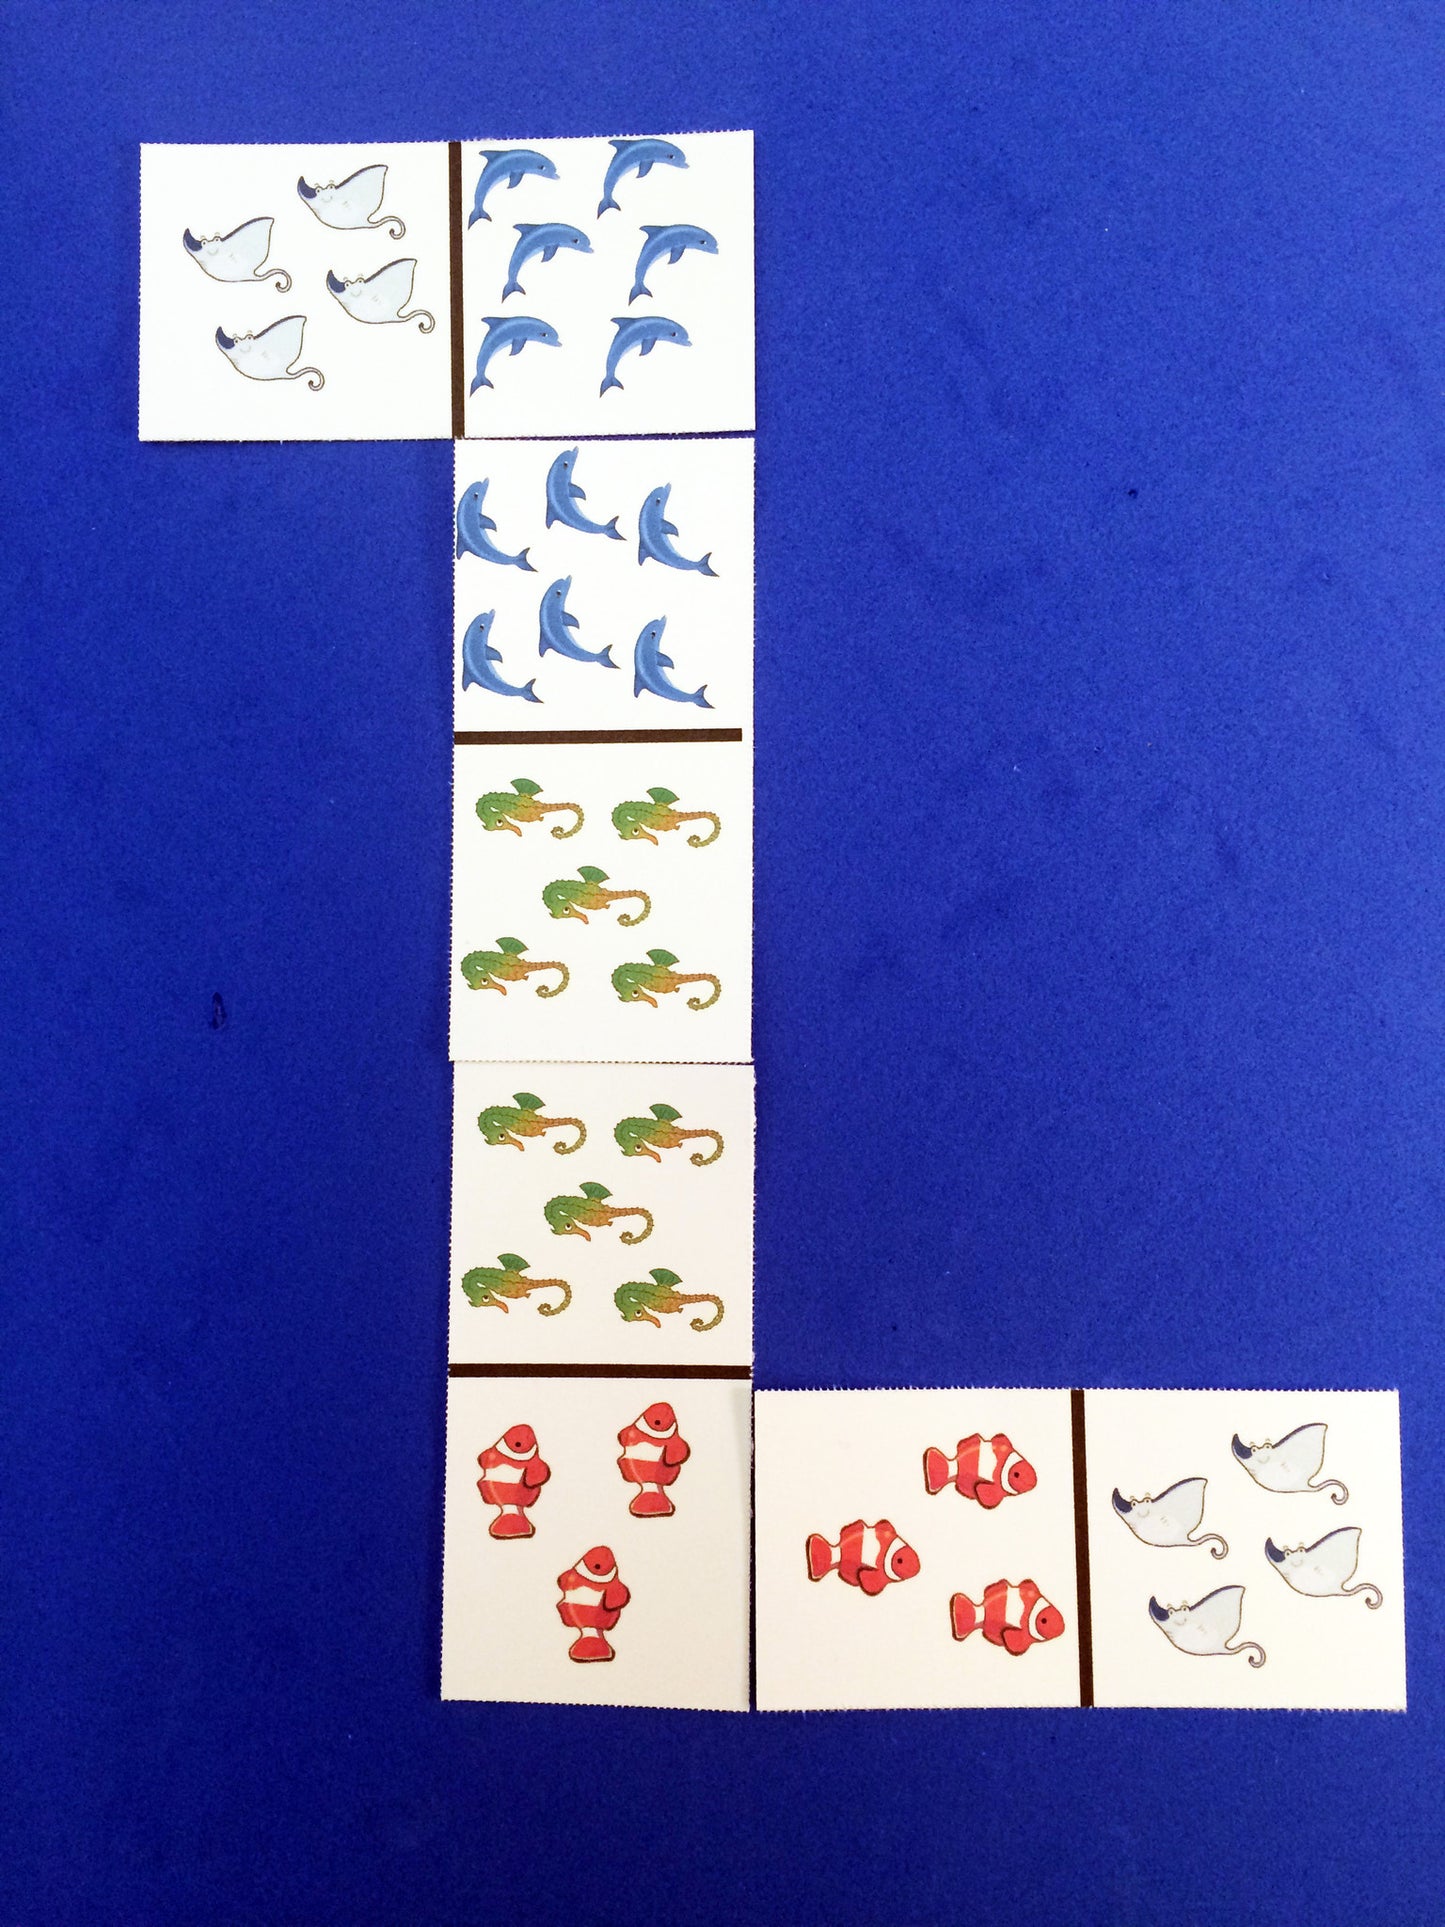 Sea Creature Dominoes, a math game inspired by the book Over in an Ocean in a Coral Reef.